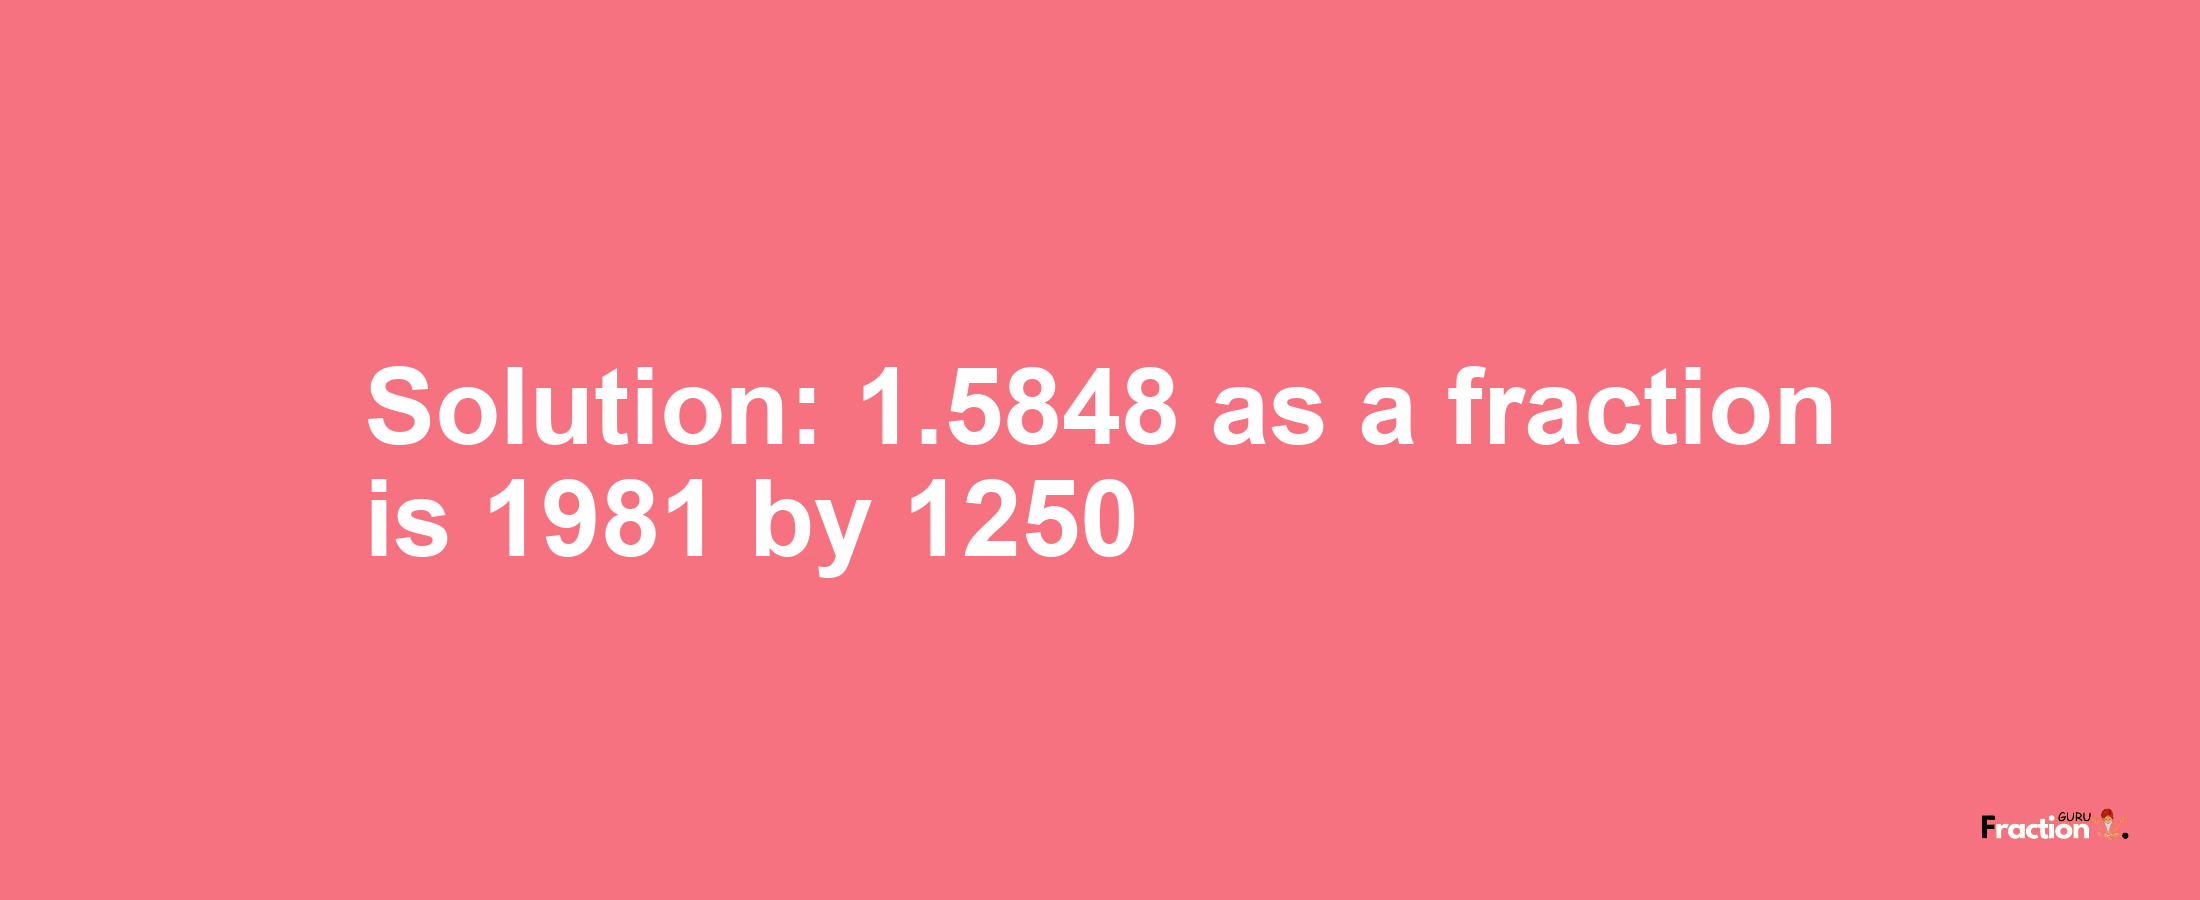 Solution:1.5848 as a fraction is 1981/1250